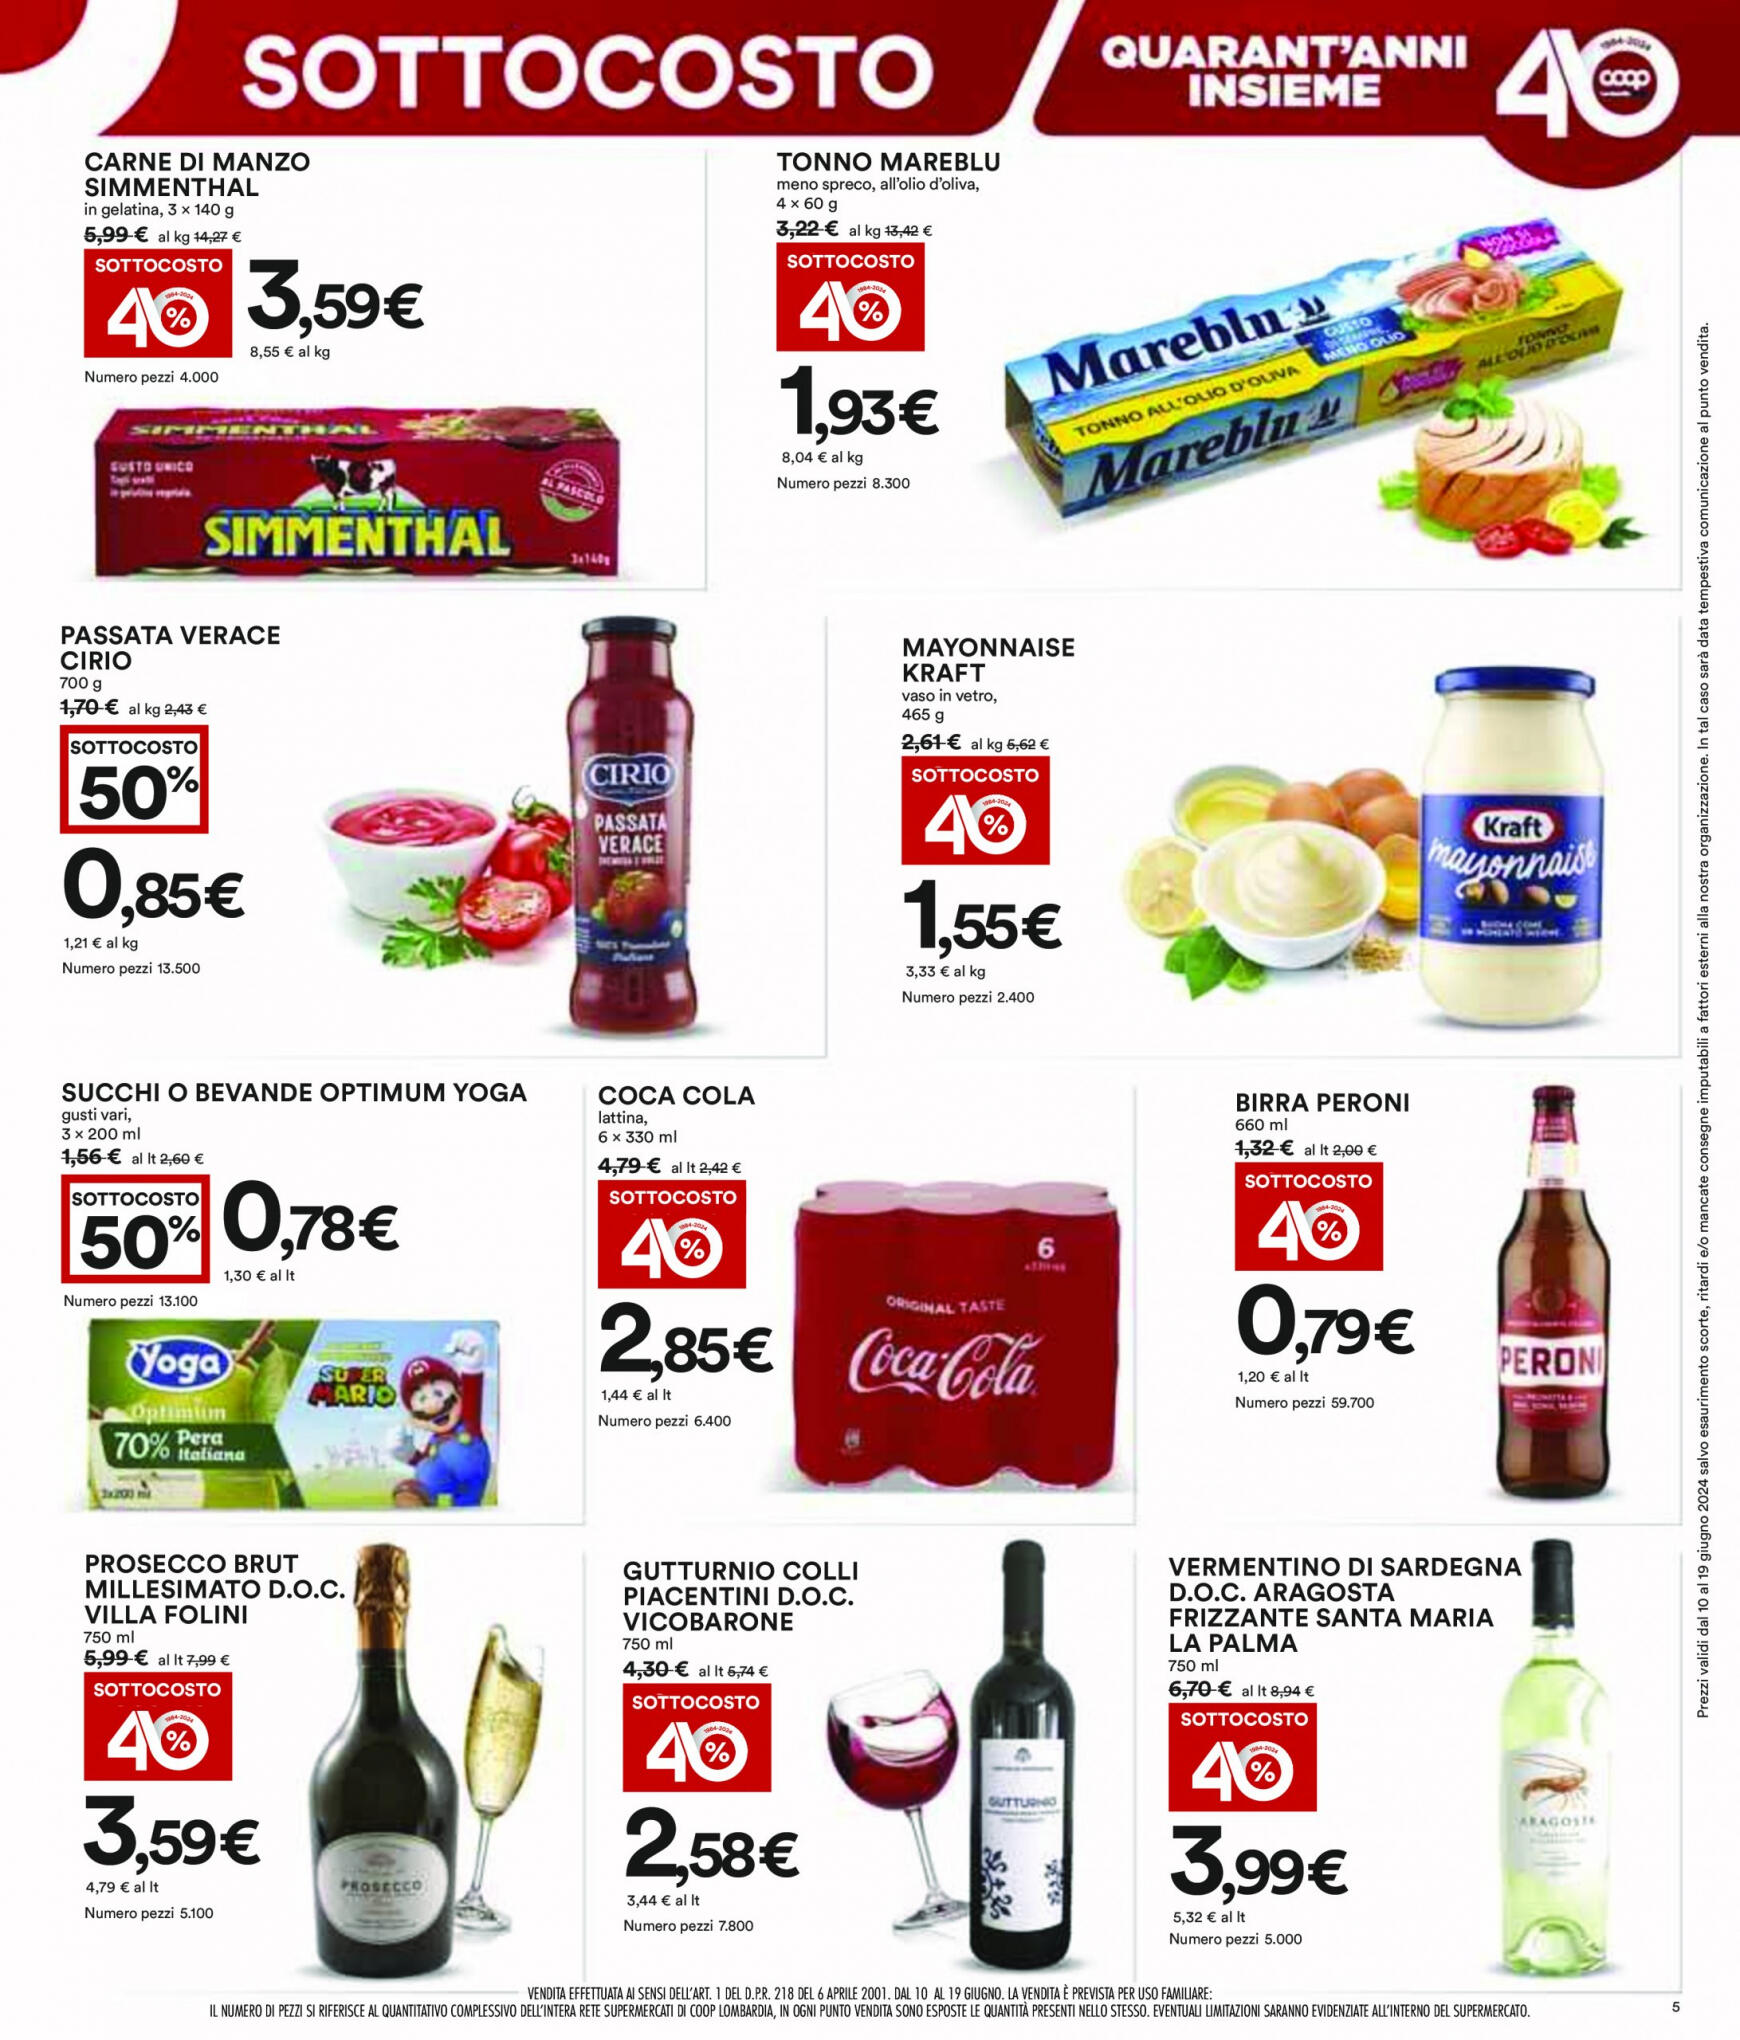 coop - Nuovo volantino Coop 10.06. - 19.06. - page: 5